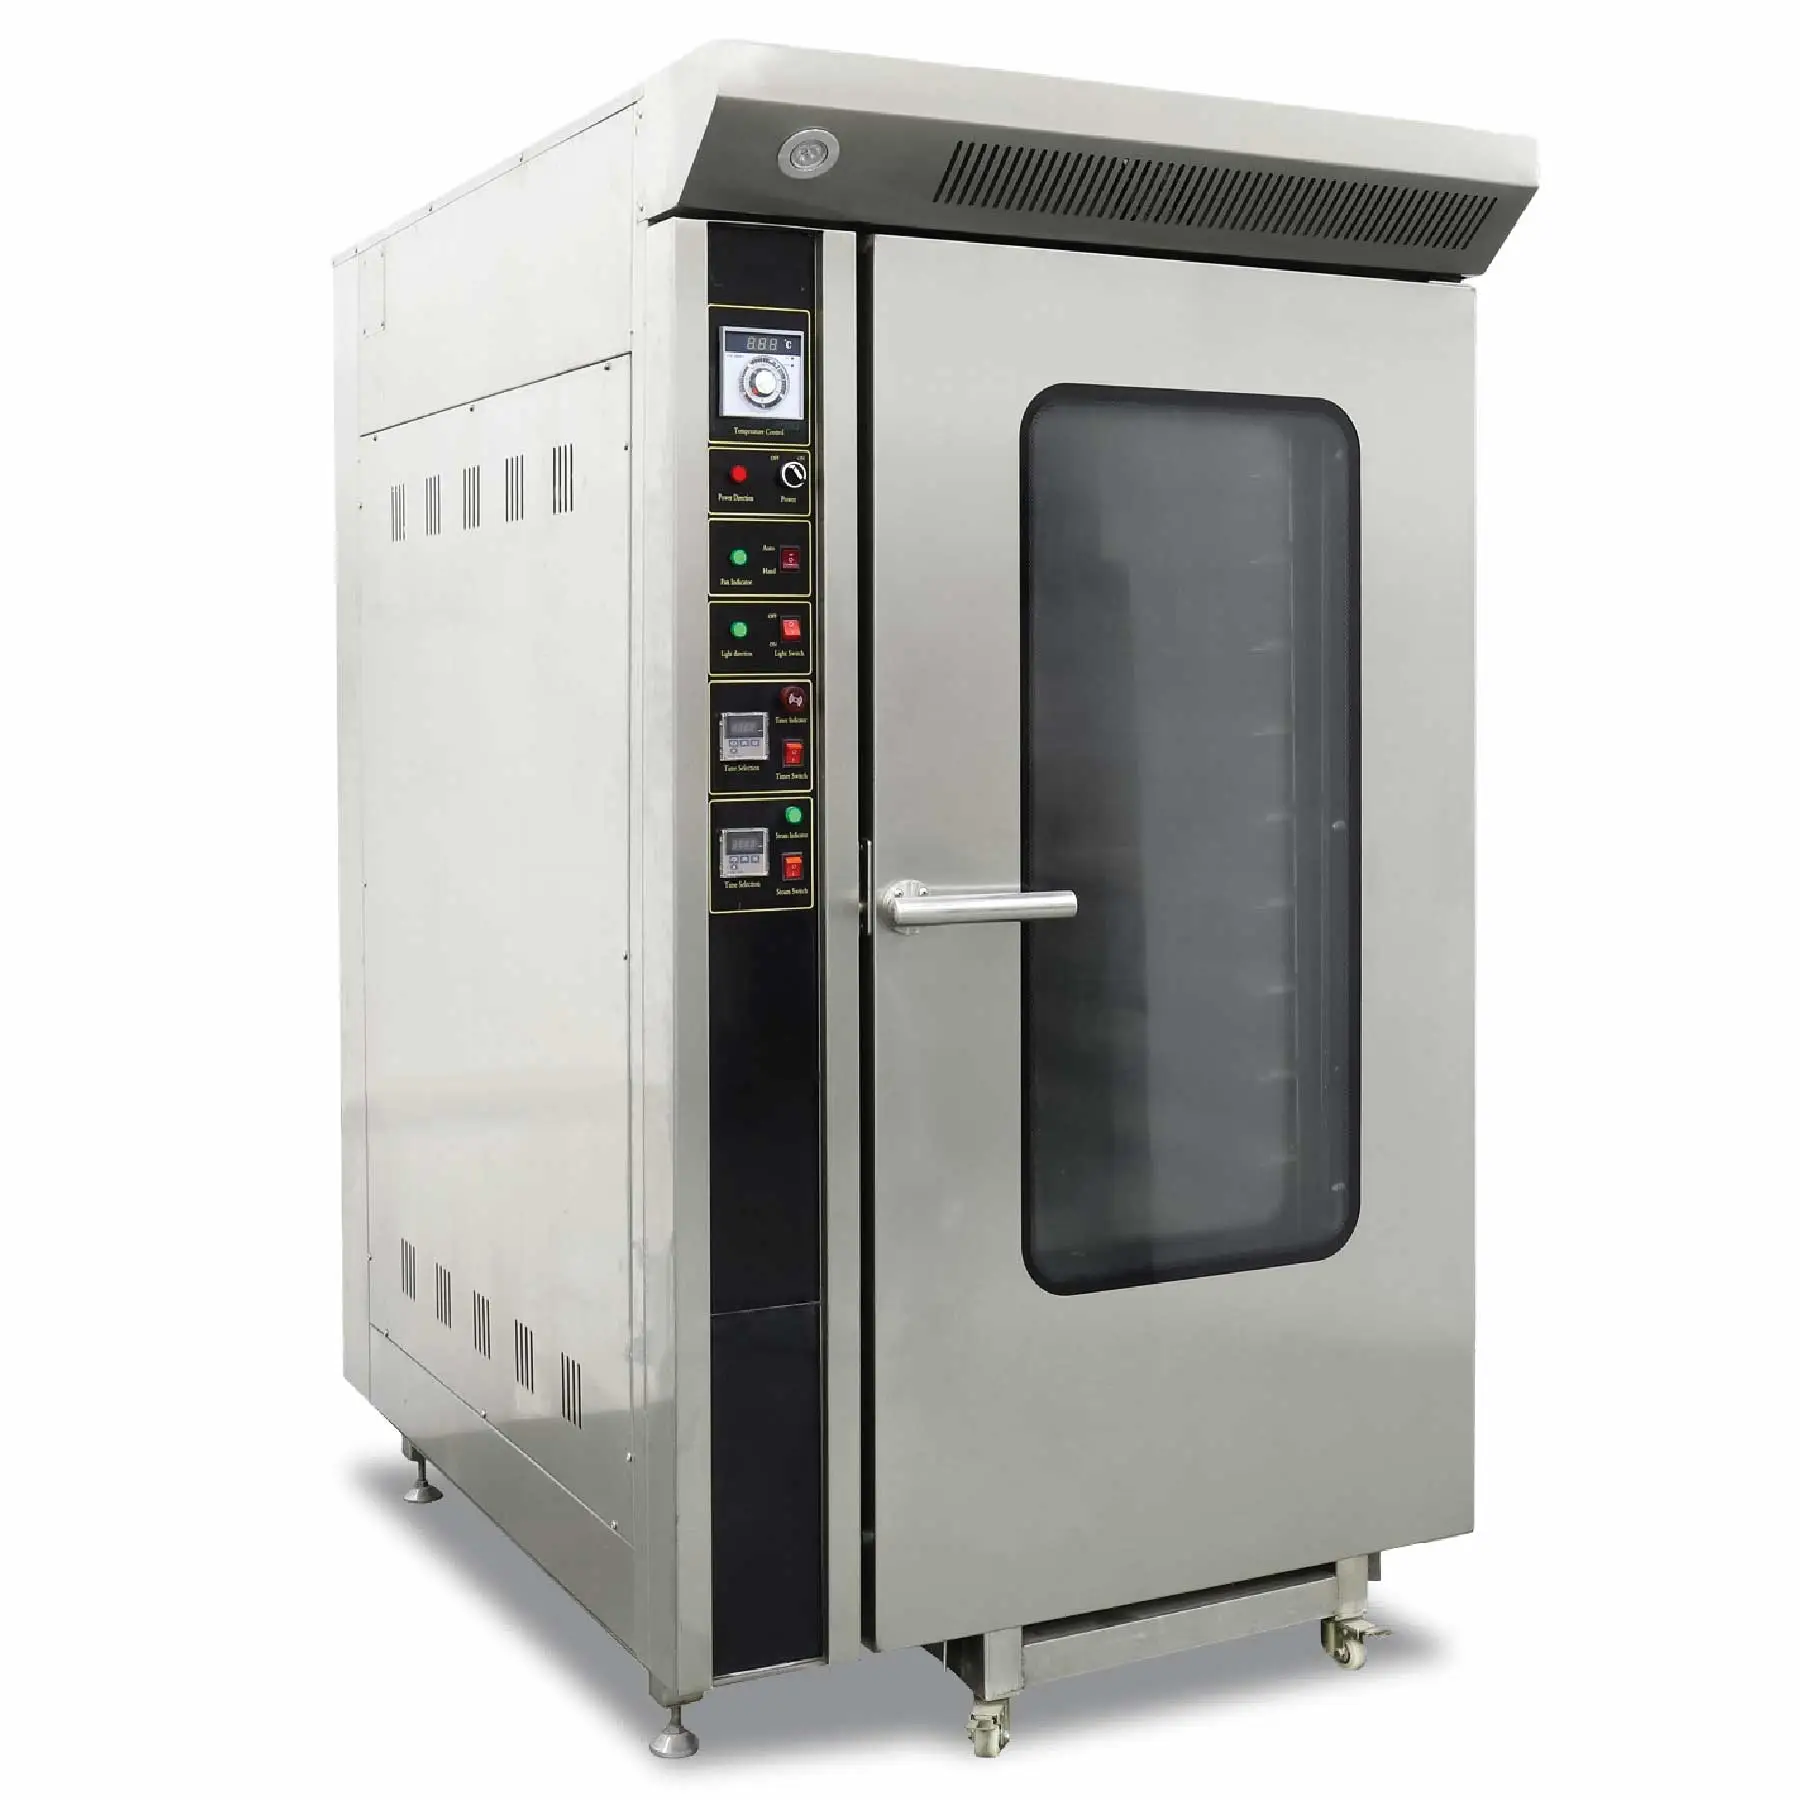 The Bakewave Convection Oven 12 tray